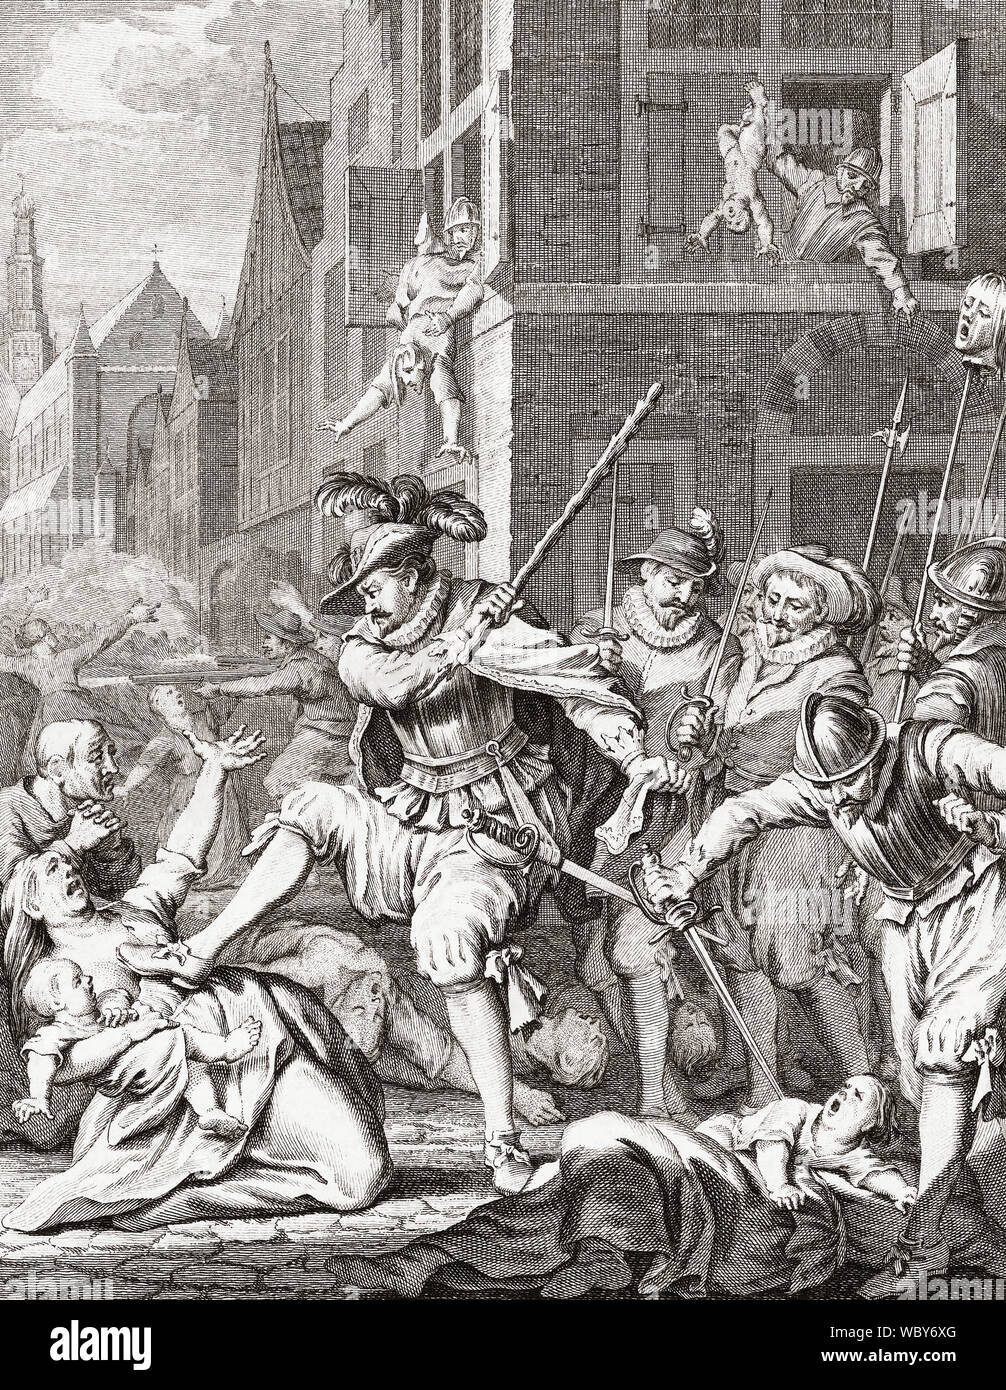 Propaganda picture depicting brutality of the Spanish army in 1573 after the surrender of Haarlem, Netherlands, during the Eighty Years War.  The picture shows Spanish commander Fadrique Alvarez de Toledo clubbing a woman and her child to death.  In truth Haarlem’s civilians were spared, having agreed to pay the Spaniards for their lives, but most of the defending military garrison were executed.  After an 18th century engraving. Stock Photo